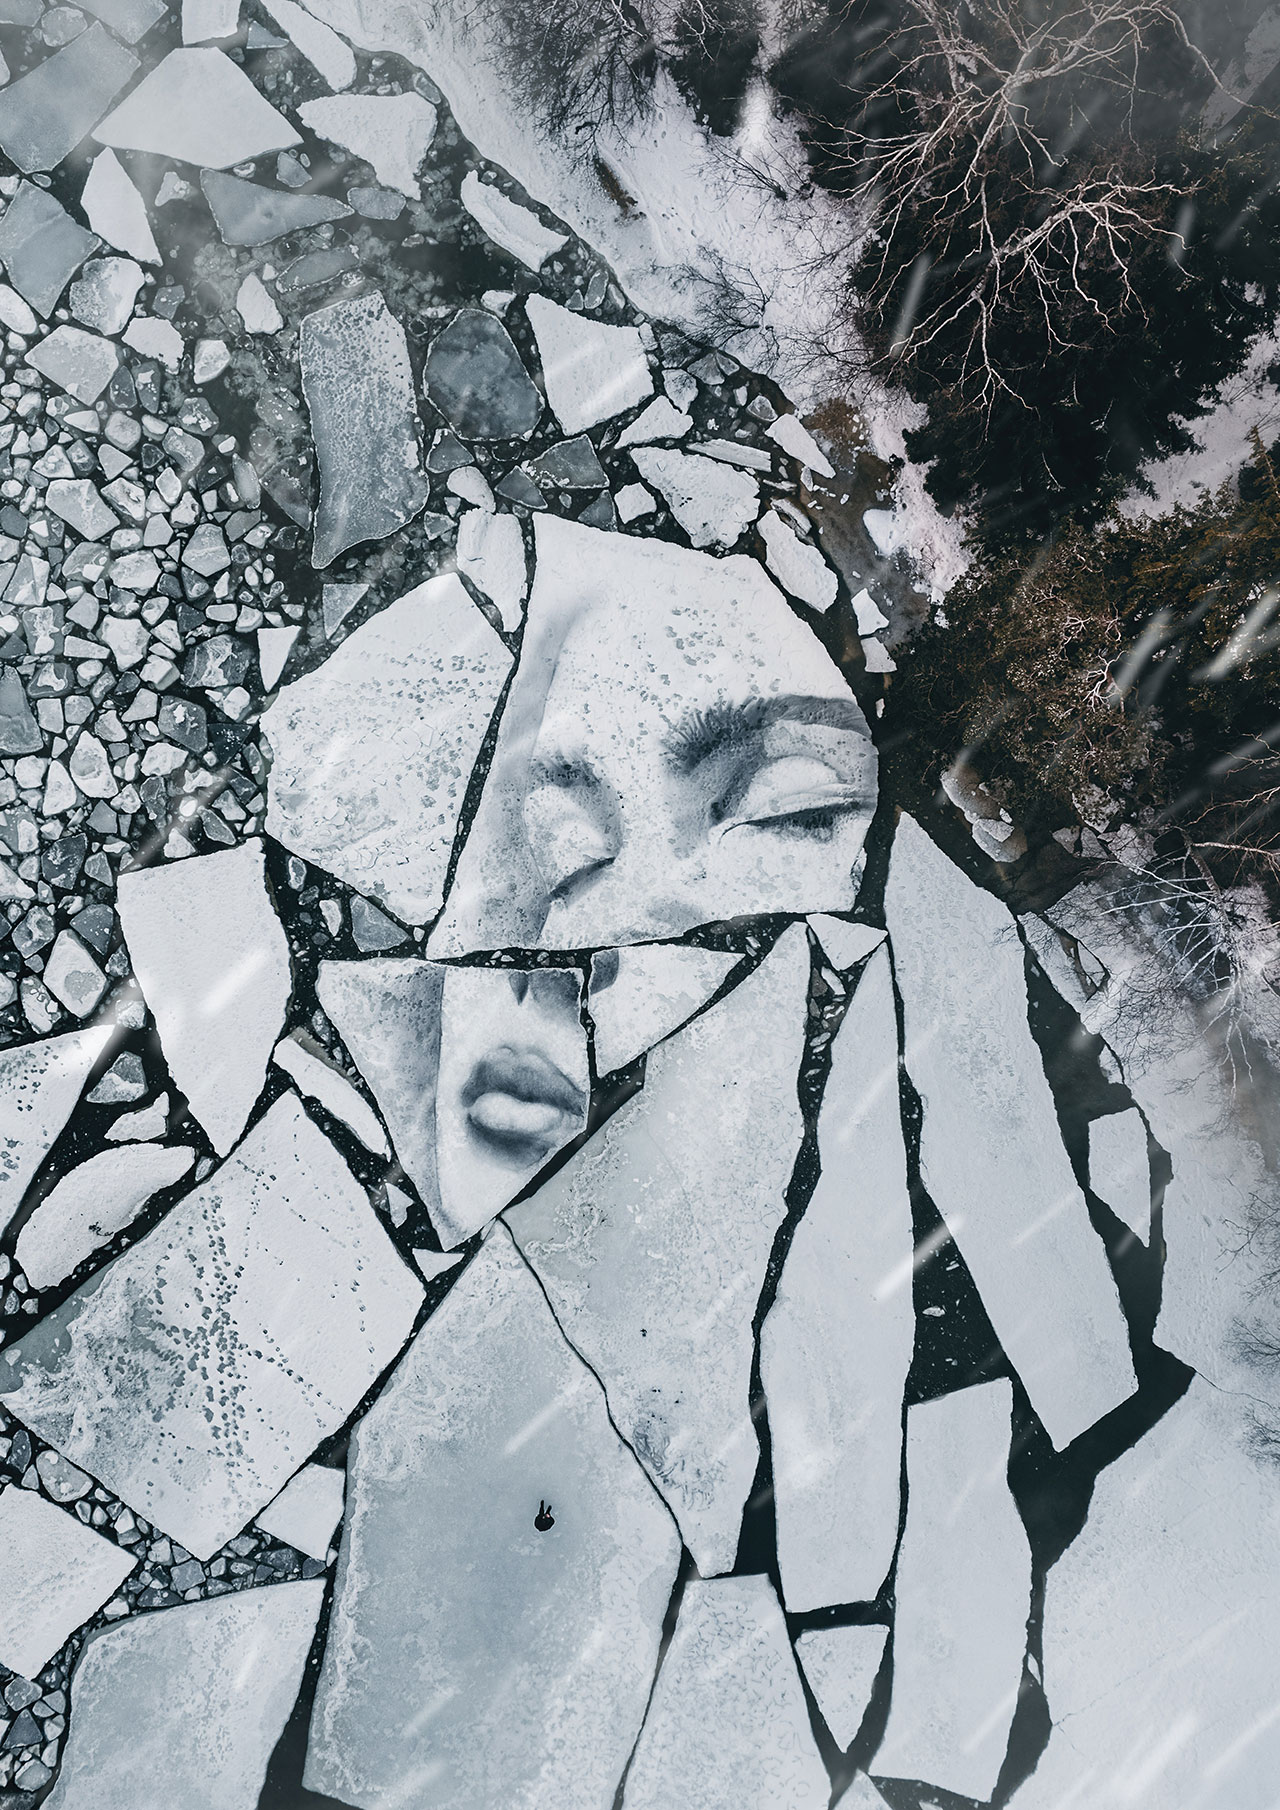 Fragment 2. From the Fractured series.
Photography © David Popa